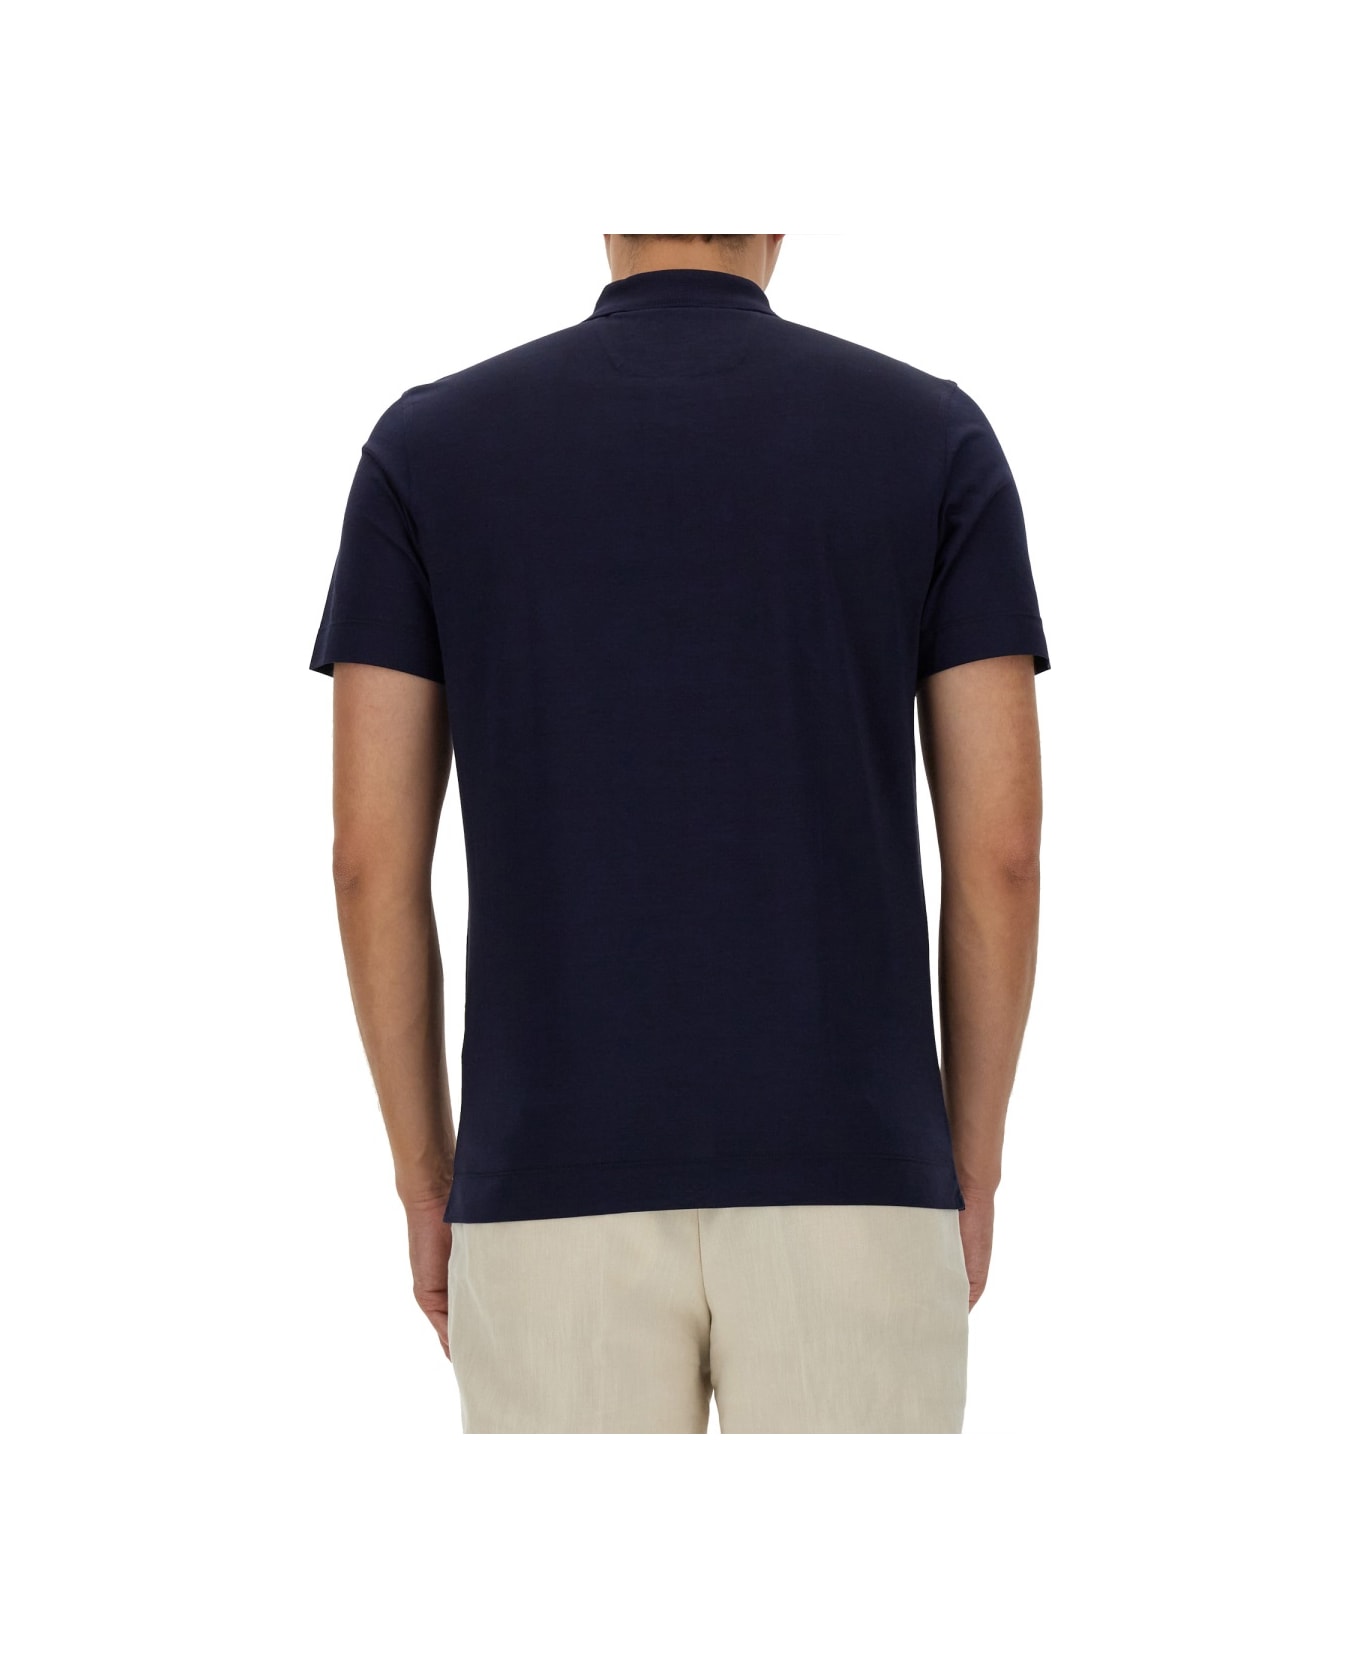 Hugo Boss Knitted Polo. - BLUE ポロシャツ